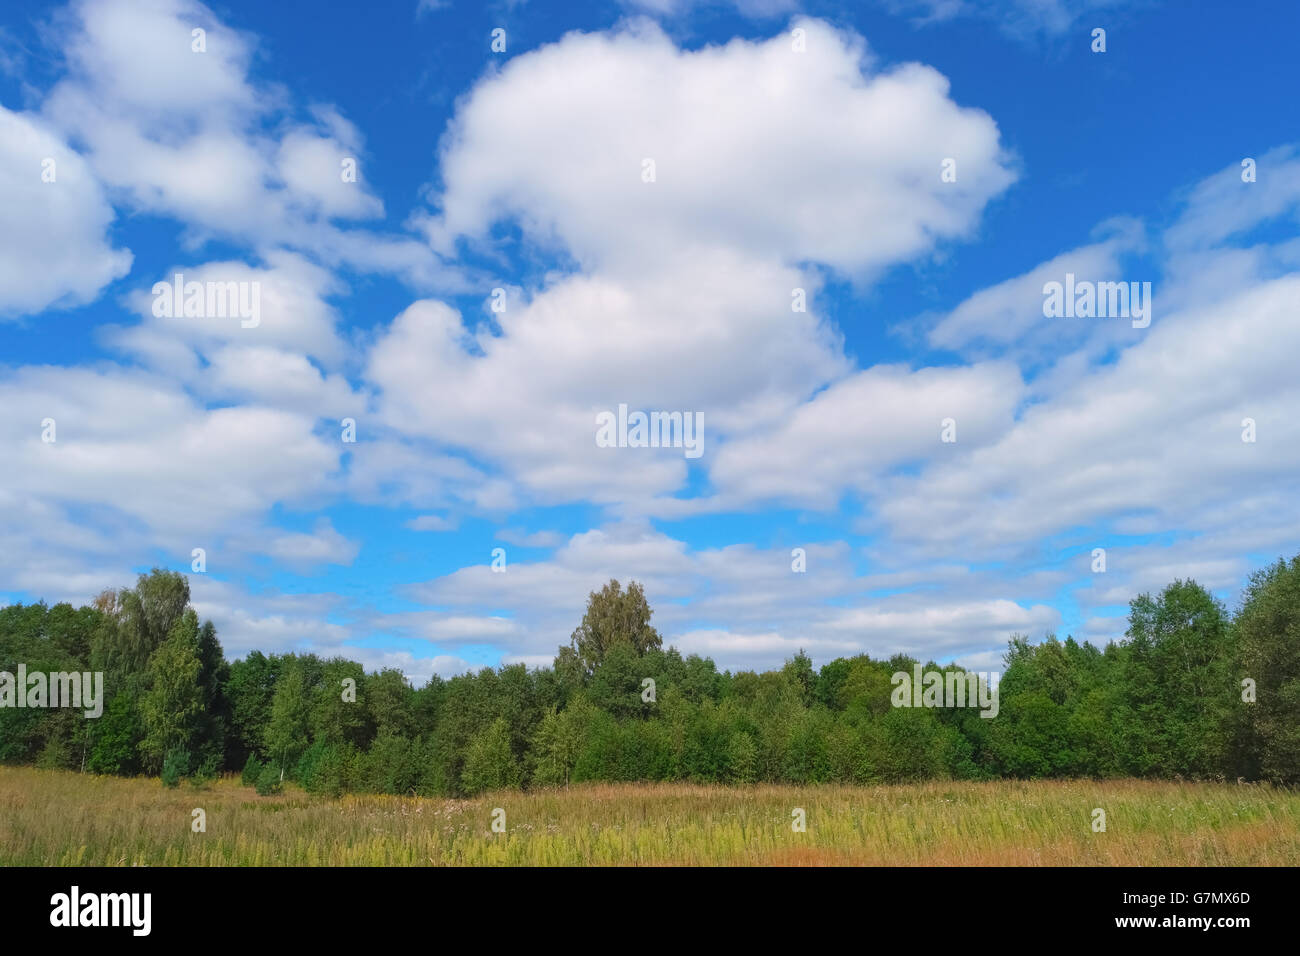 Beautiful summer landscape with sky, clouds, grass and trees Stock Photo